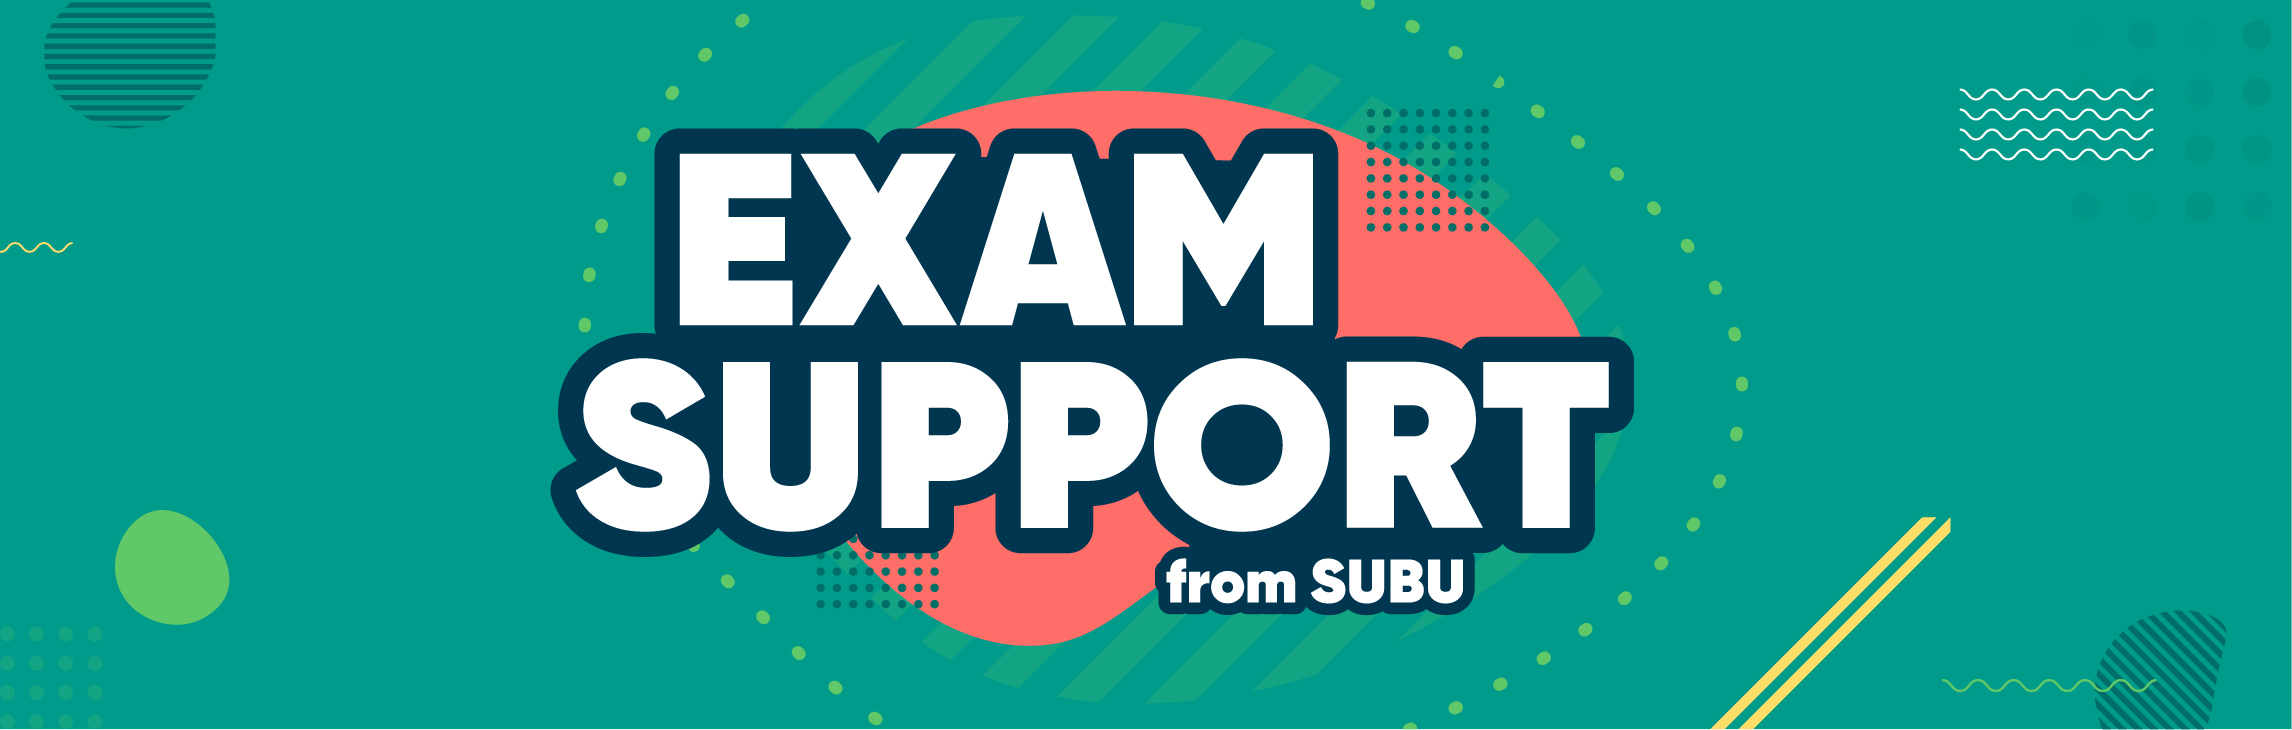 Exam Support from SUBU